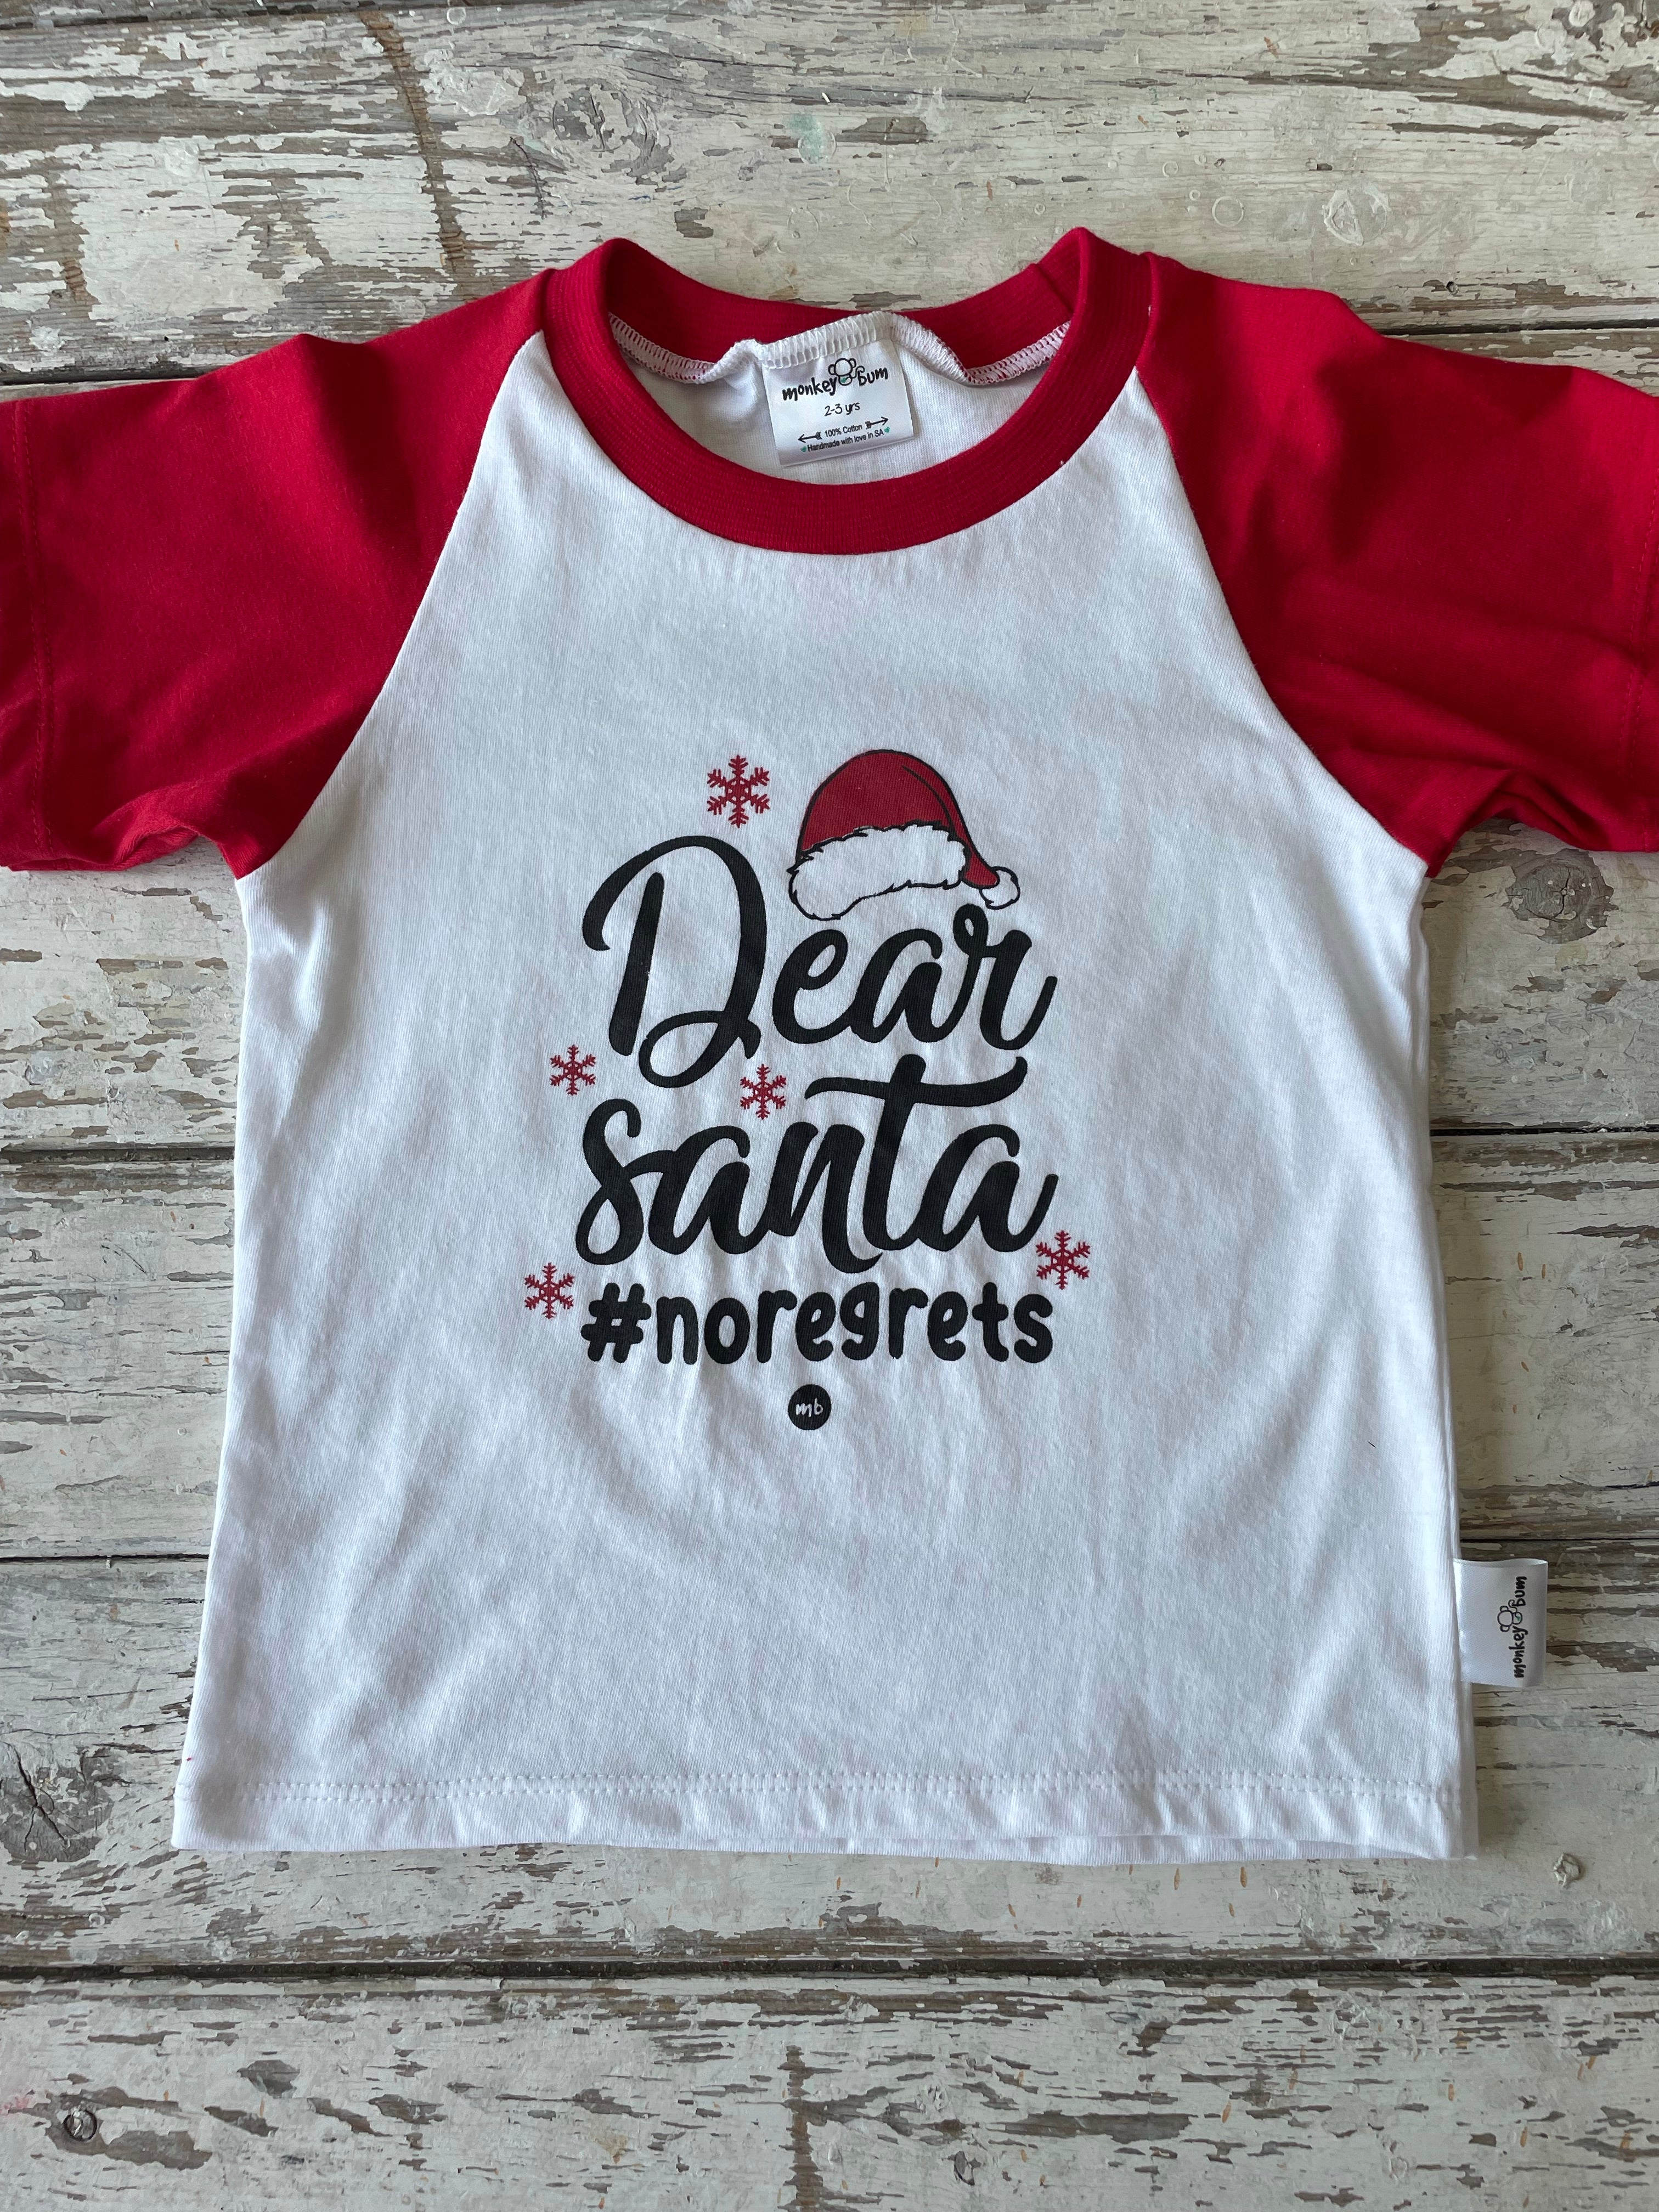 Christmas pjs (only 4-5 left)